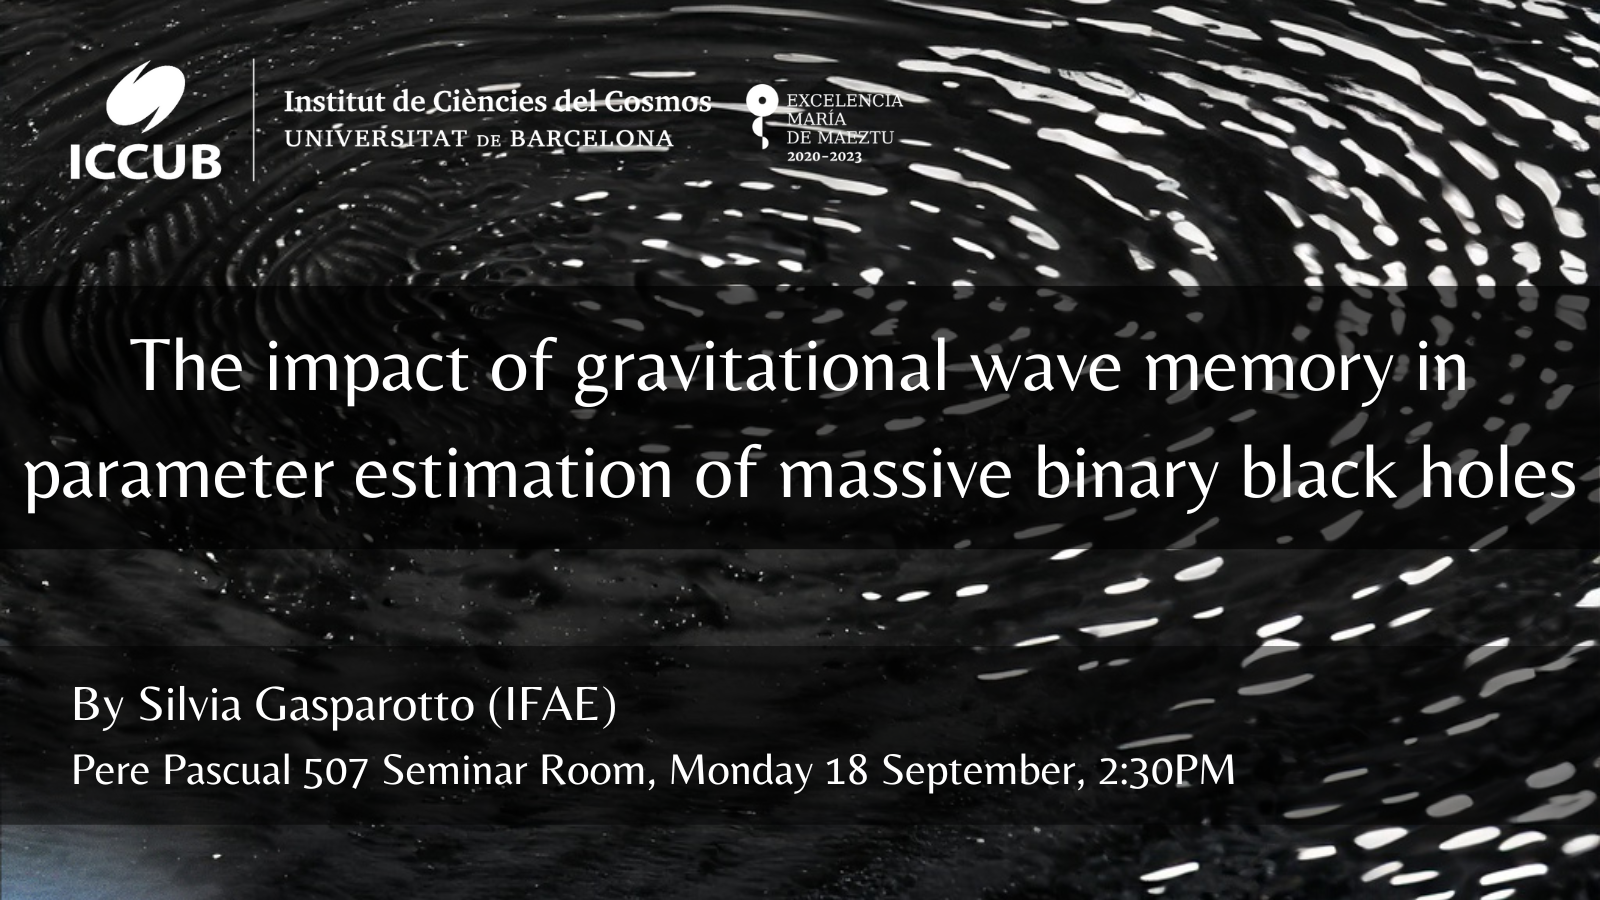 The impact of gravitational wave memory in parameter estimation of massive binary black holes